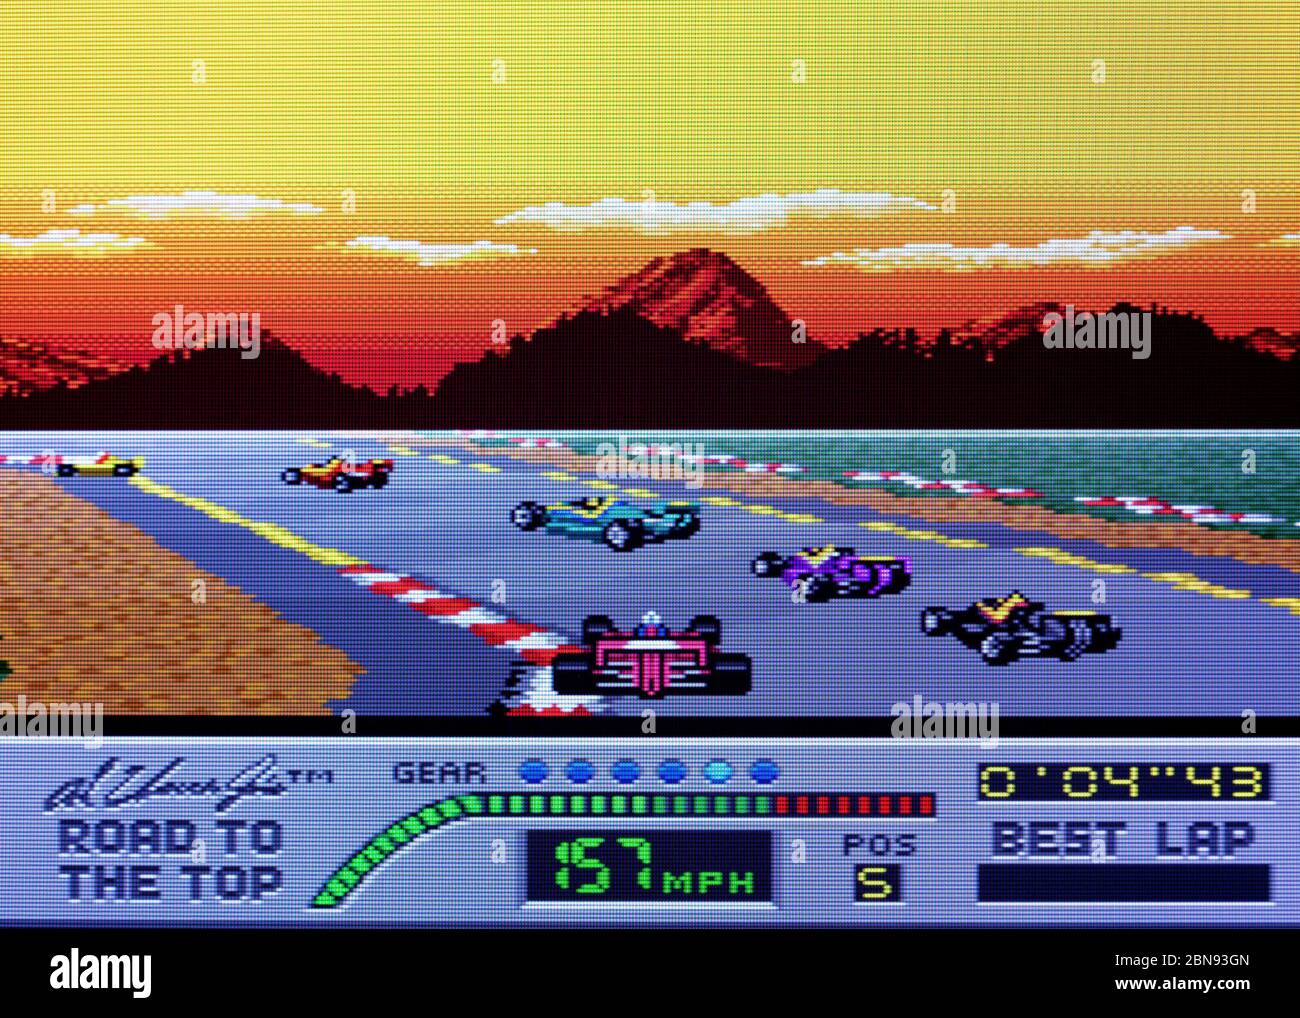 Al Unser Jr's Road to the Top - SNES Super Nintendo - Editorial use only  Stock Photo - Alamy